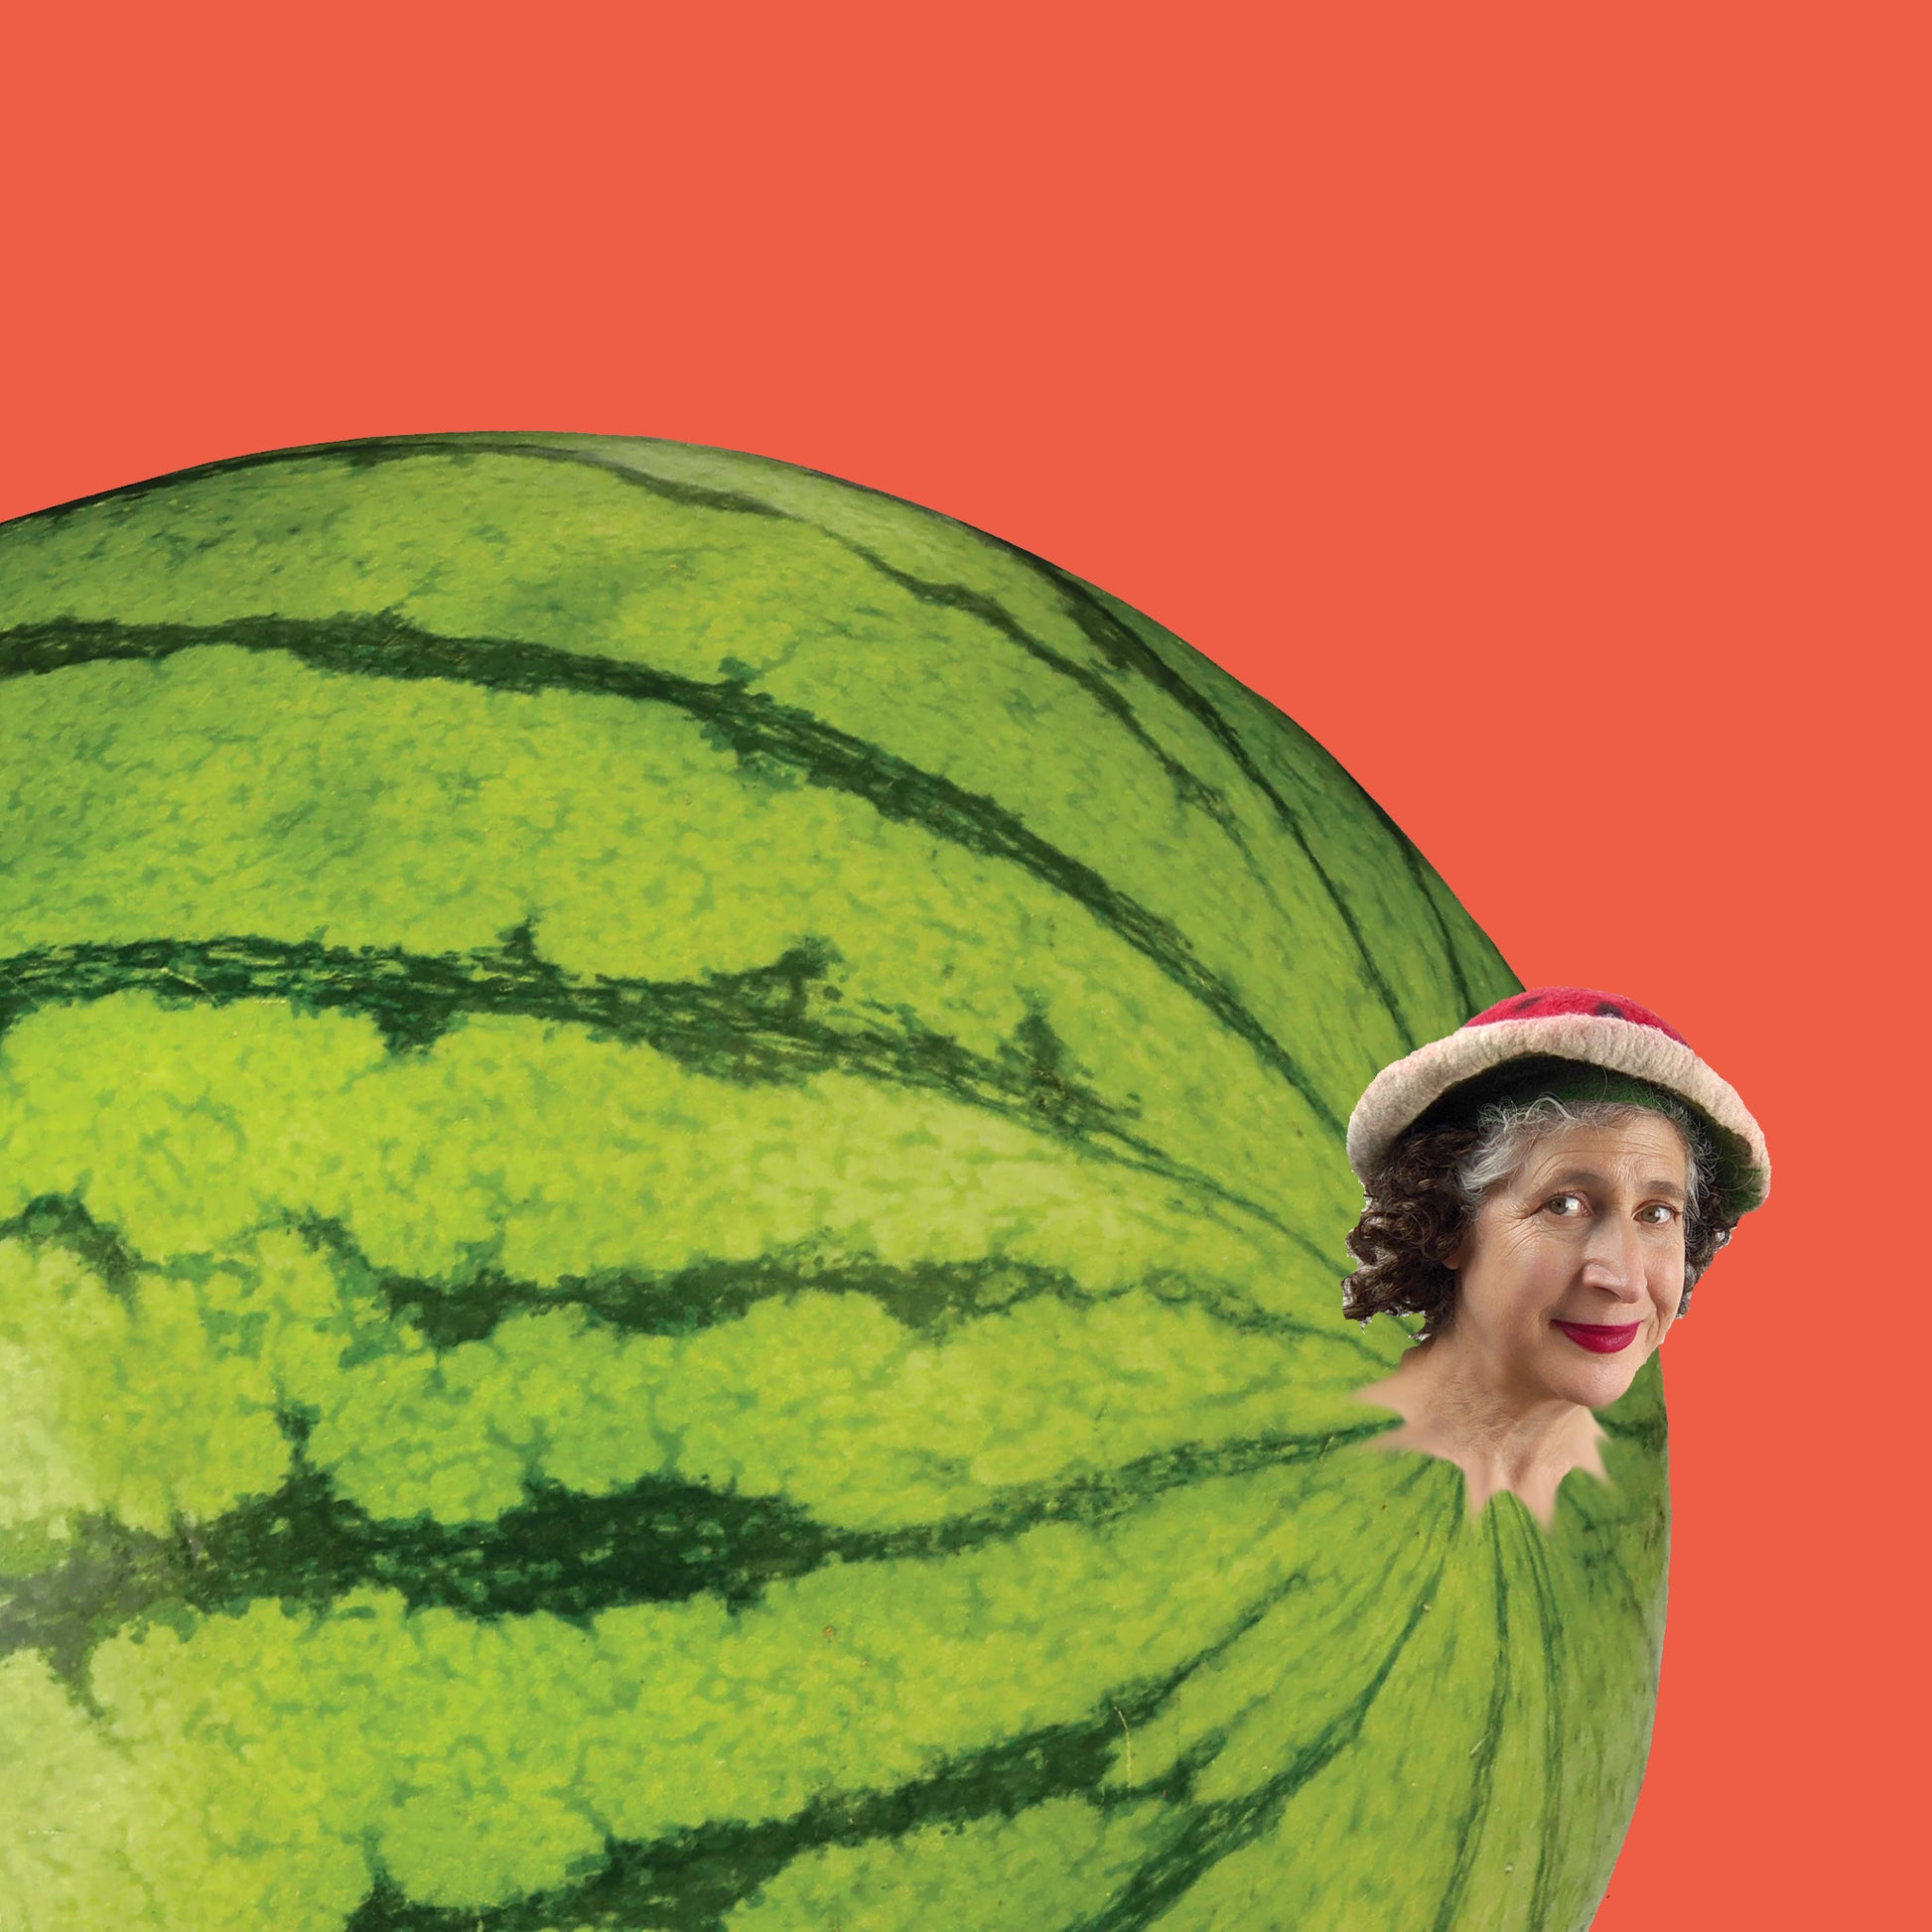 Playful digital collage of Saucer Hat as stem of Watermelon